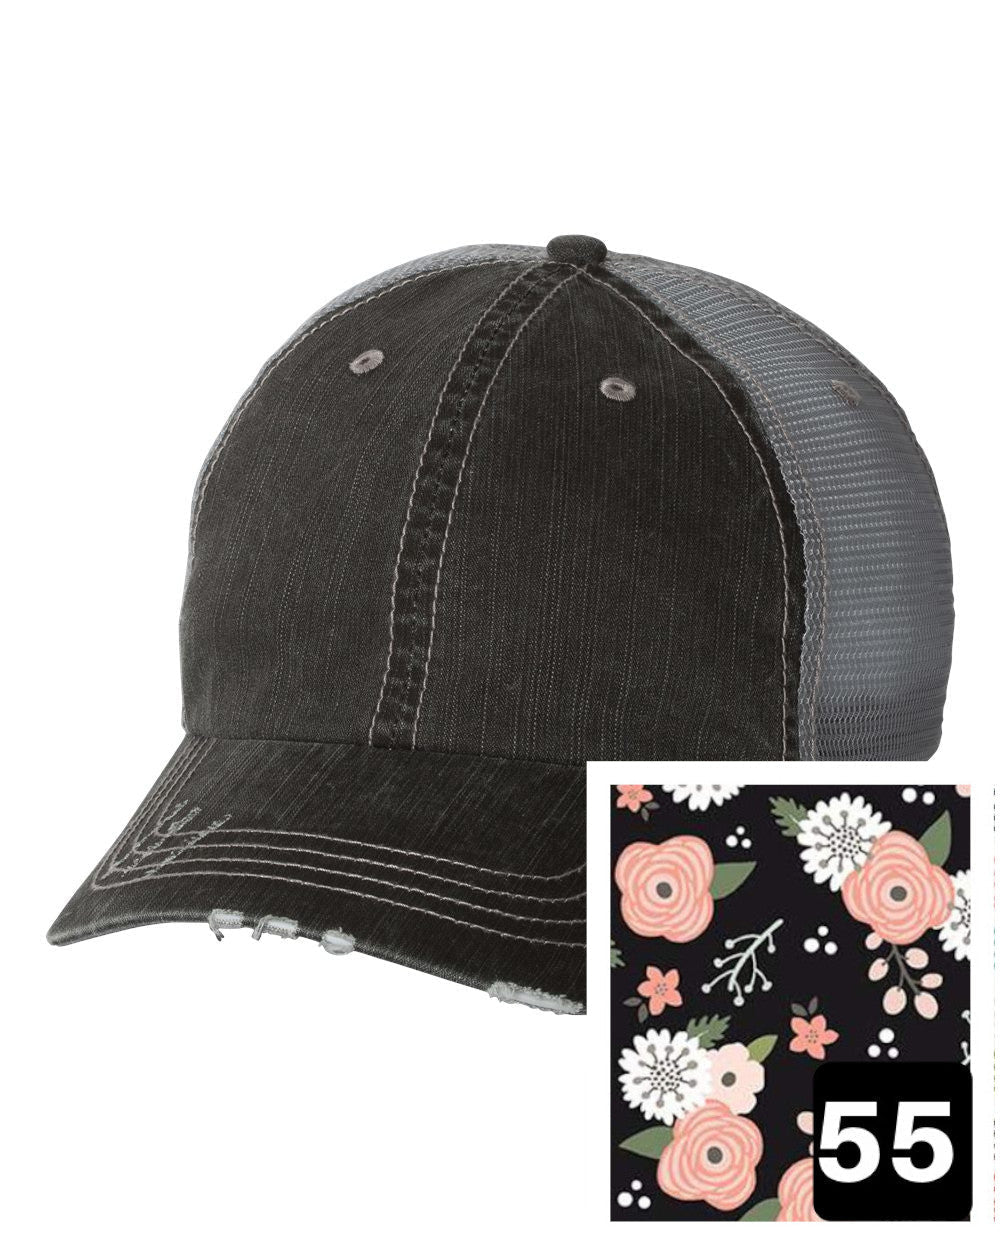 gray distressed trucker hat with petite floral on navy fabric state of Michigan